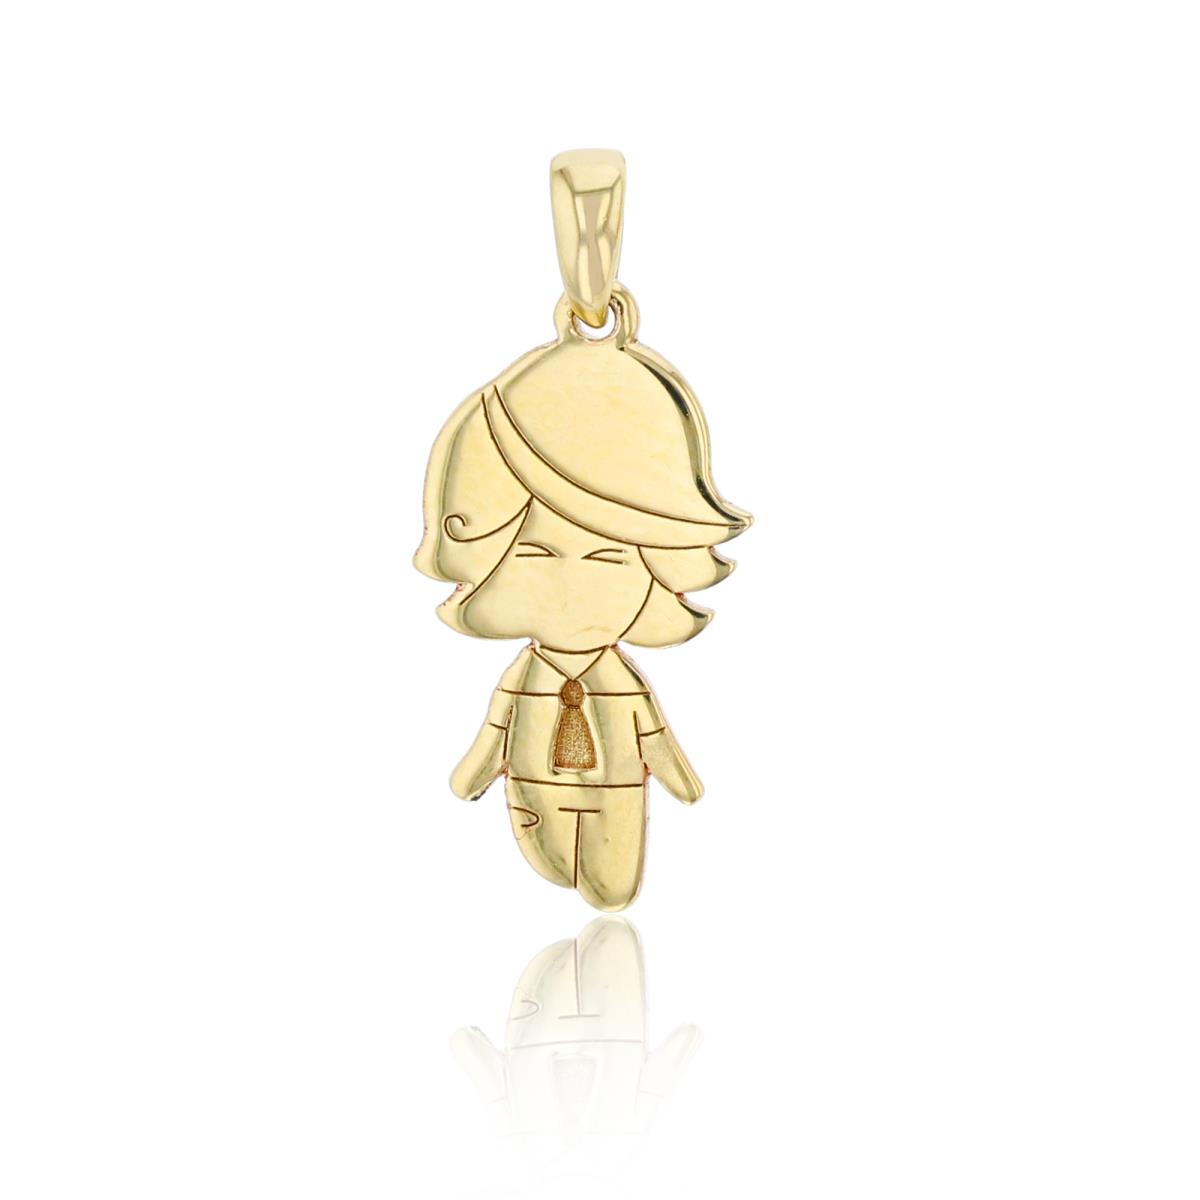 10K Yellow Gold 22x10mm High Polished Girl with Tie Dangling Pendant